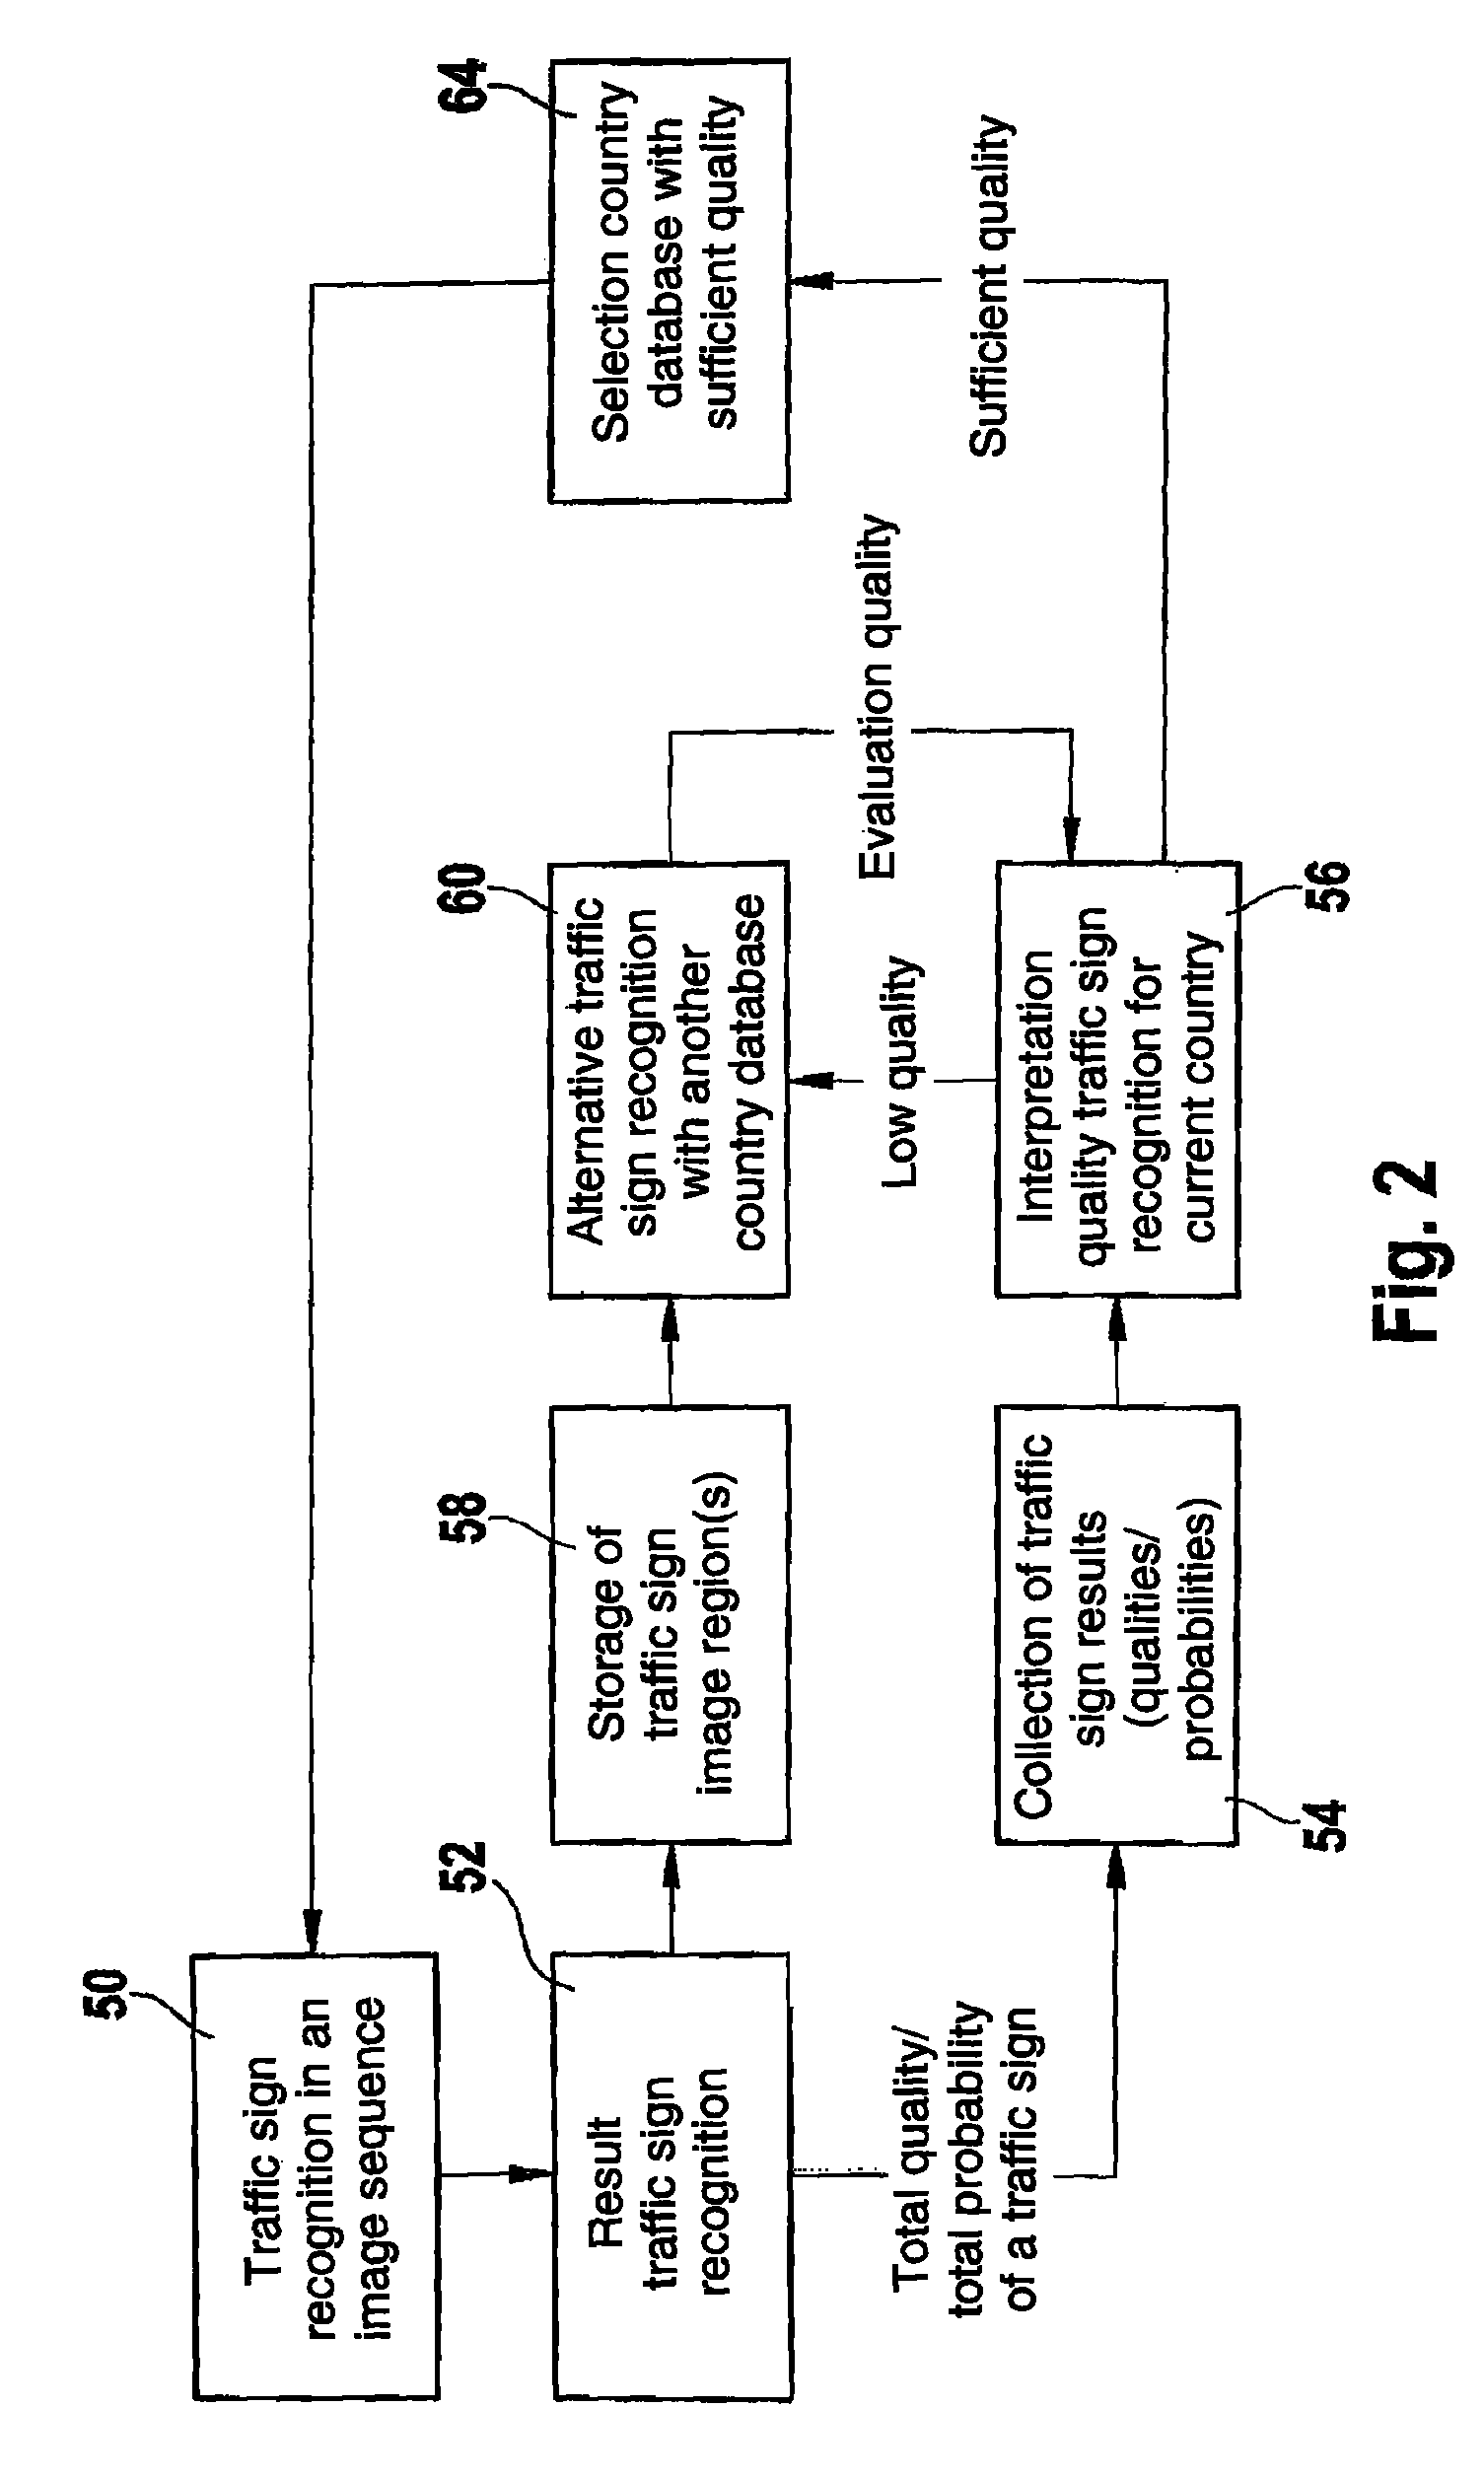 Method and device for traffic sign recognition